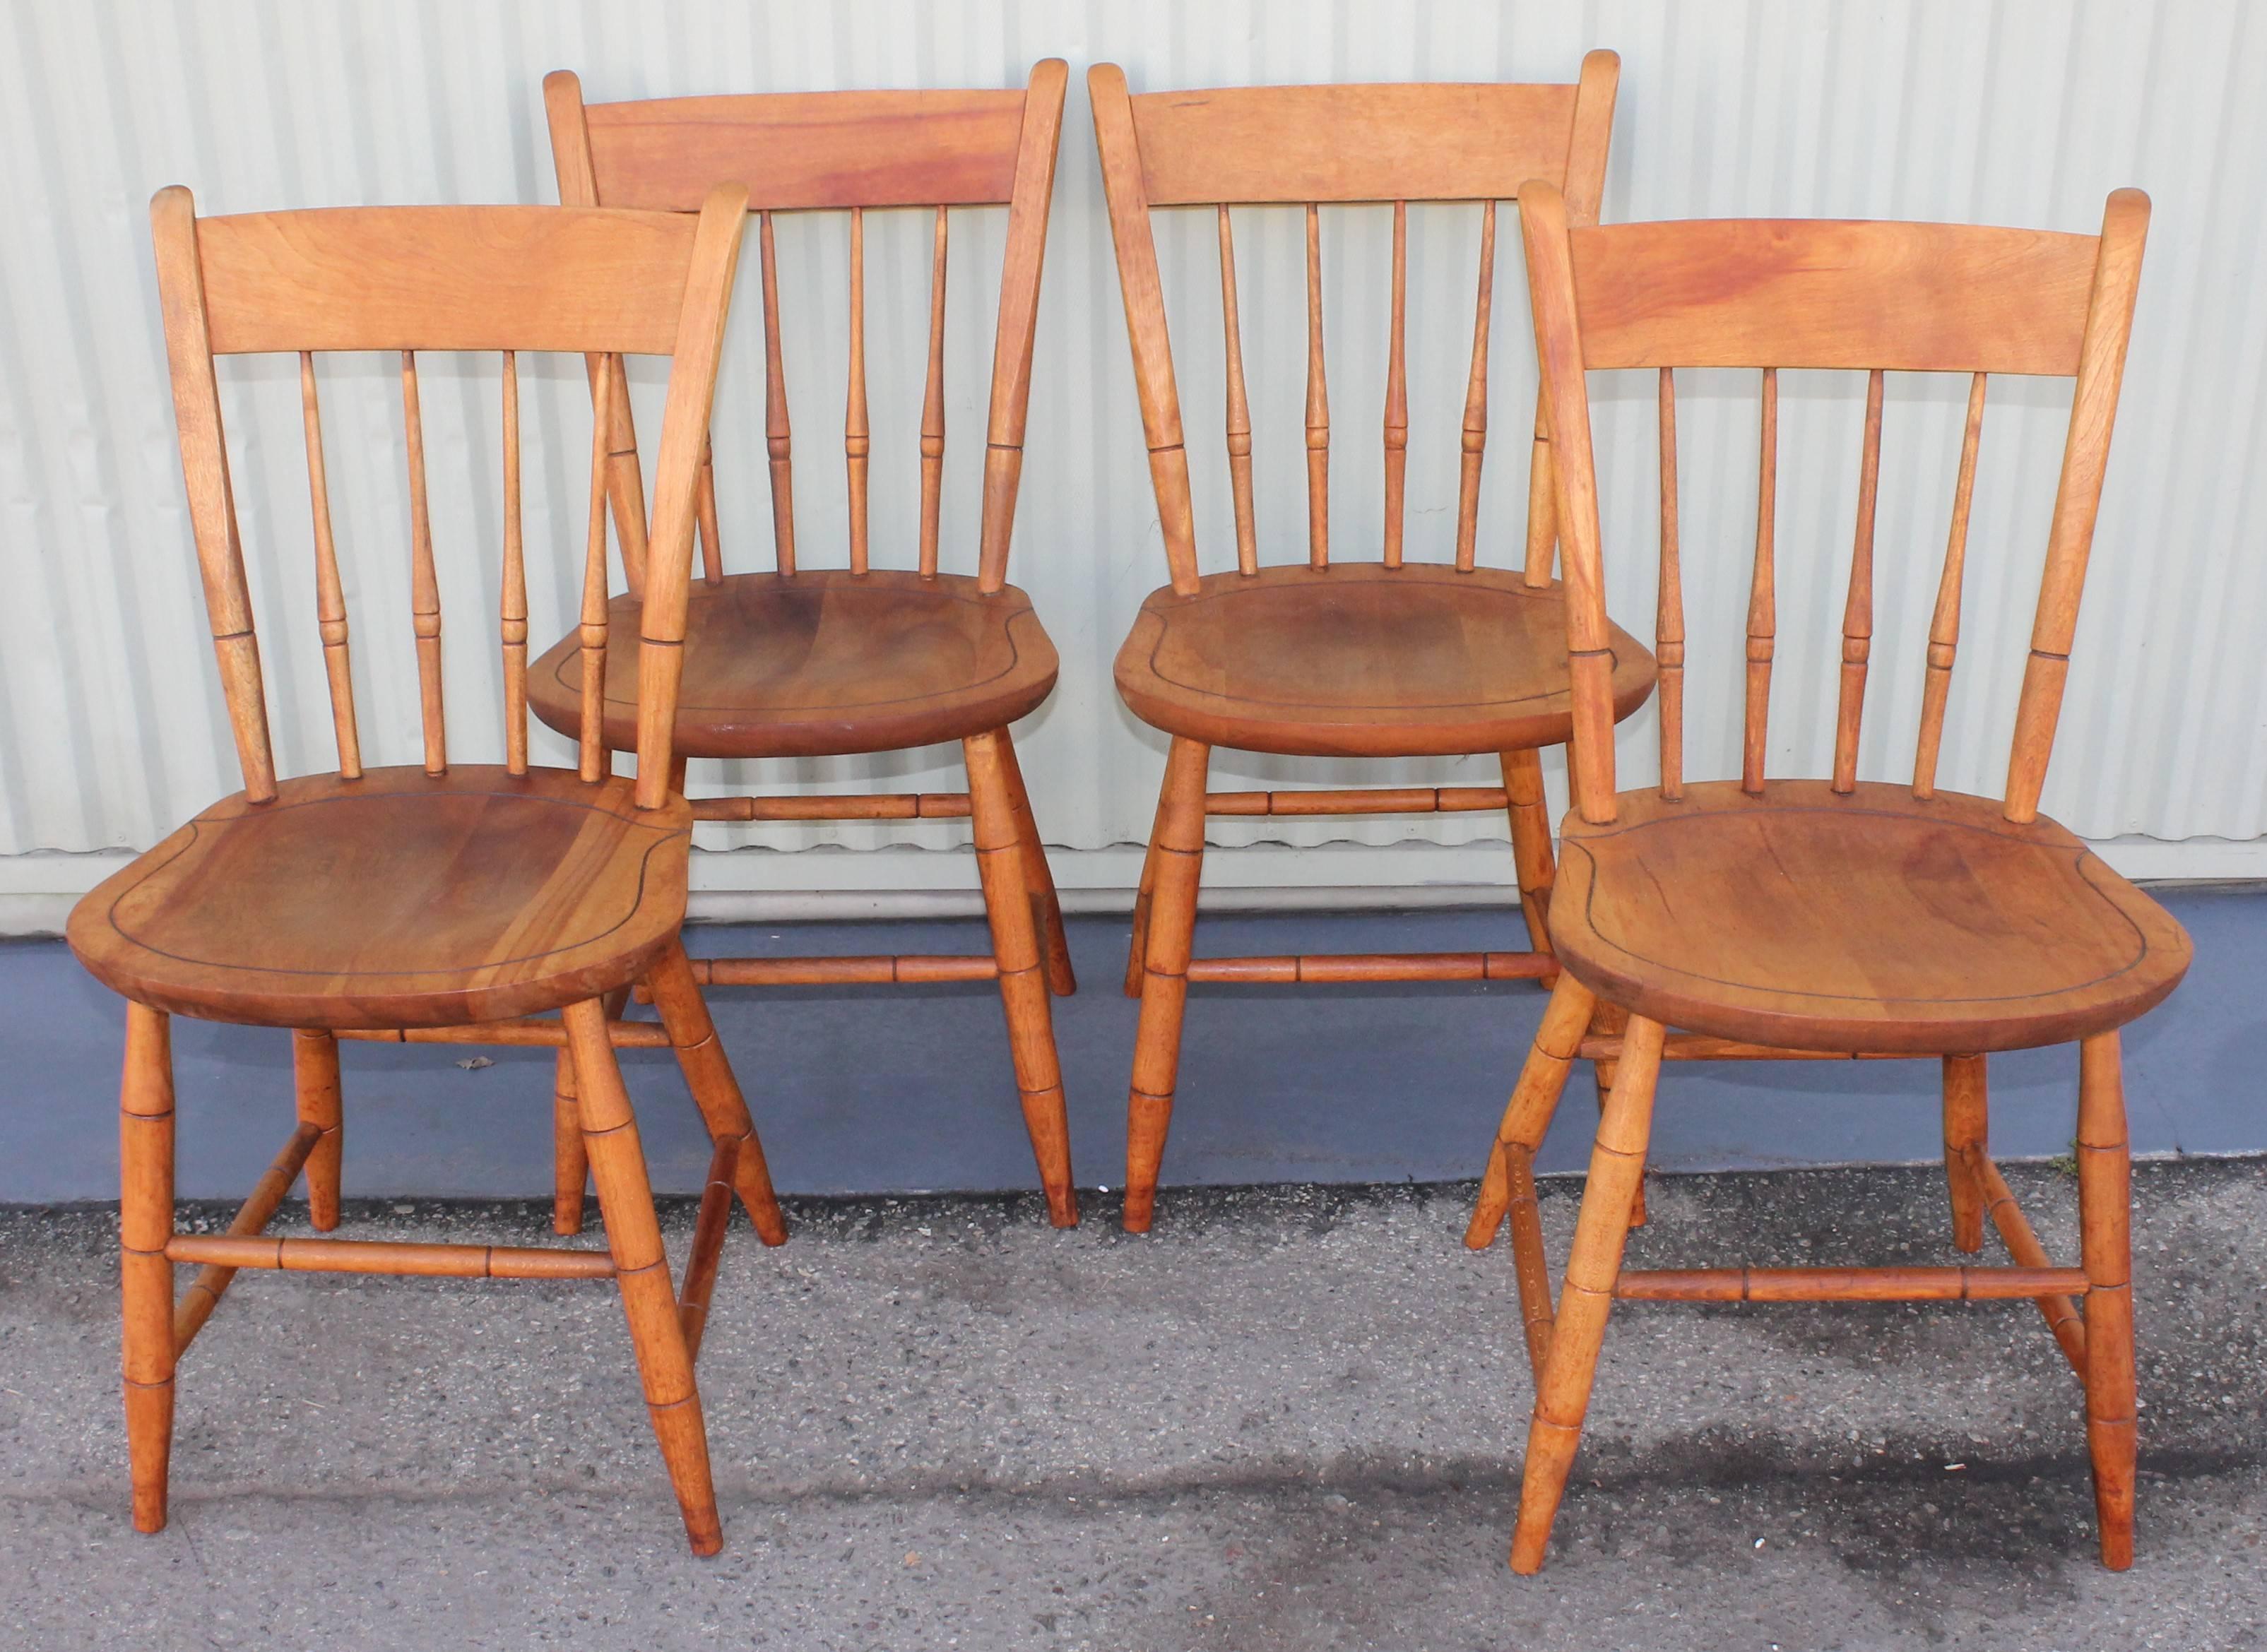 This smooth set of s maple thumb back Windsor chairs are signed on seats Nichols & Stone Co. , Gardner, Mass. They are in a natural original surface and very sturdy.